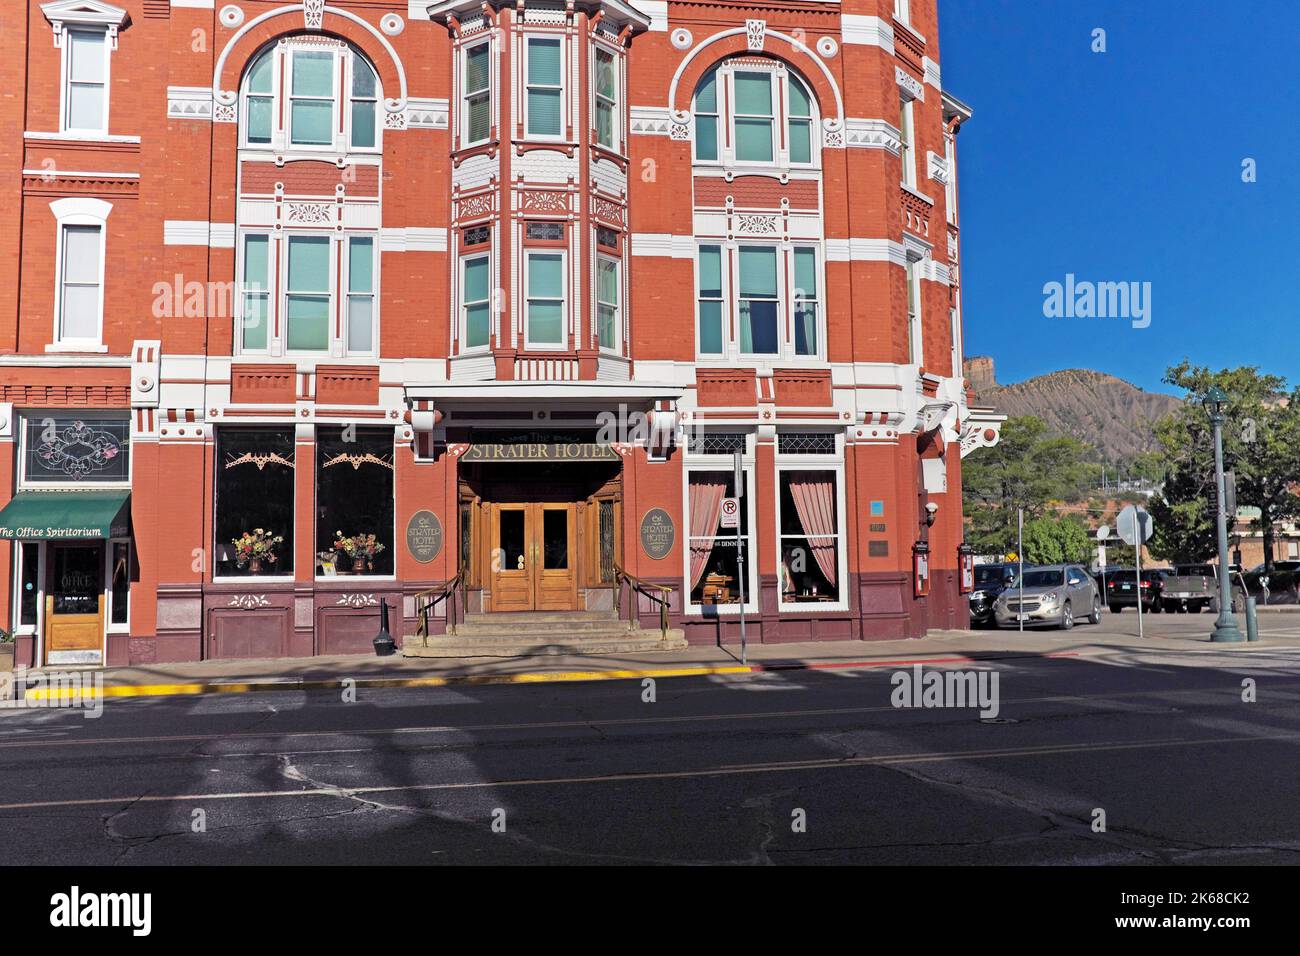 The historic landmark hotel, The Strater, at the corner of East 7th Street and Main Avenue in the historic district of Durango, Colorado, USA. Stock Photo